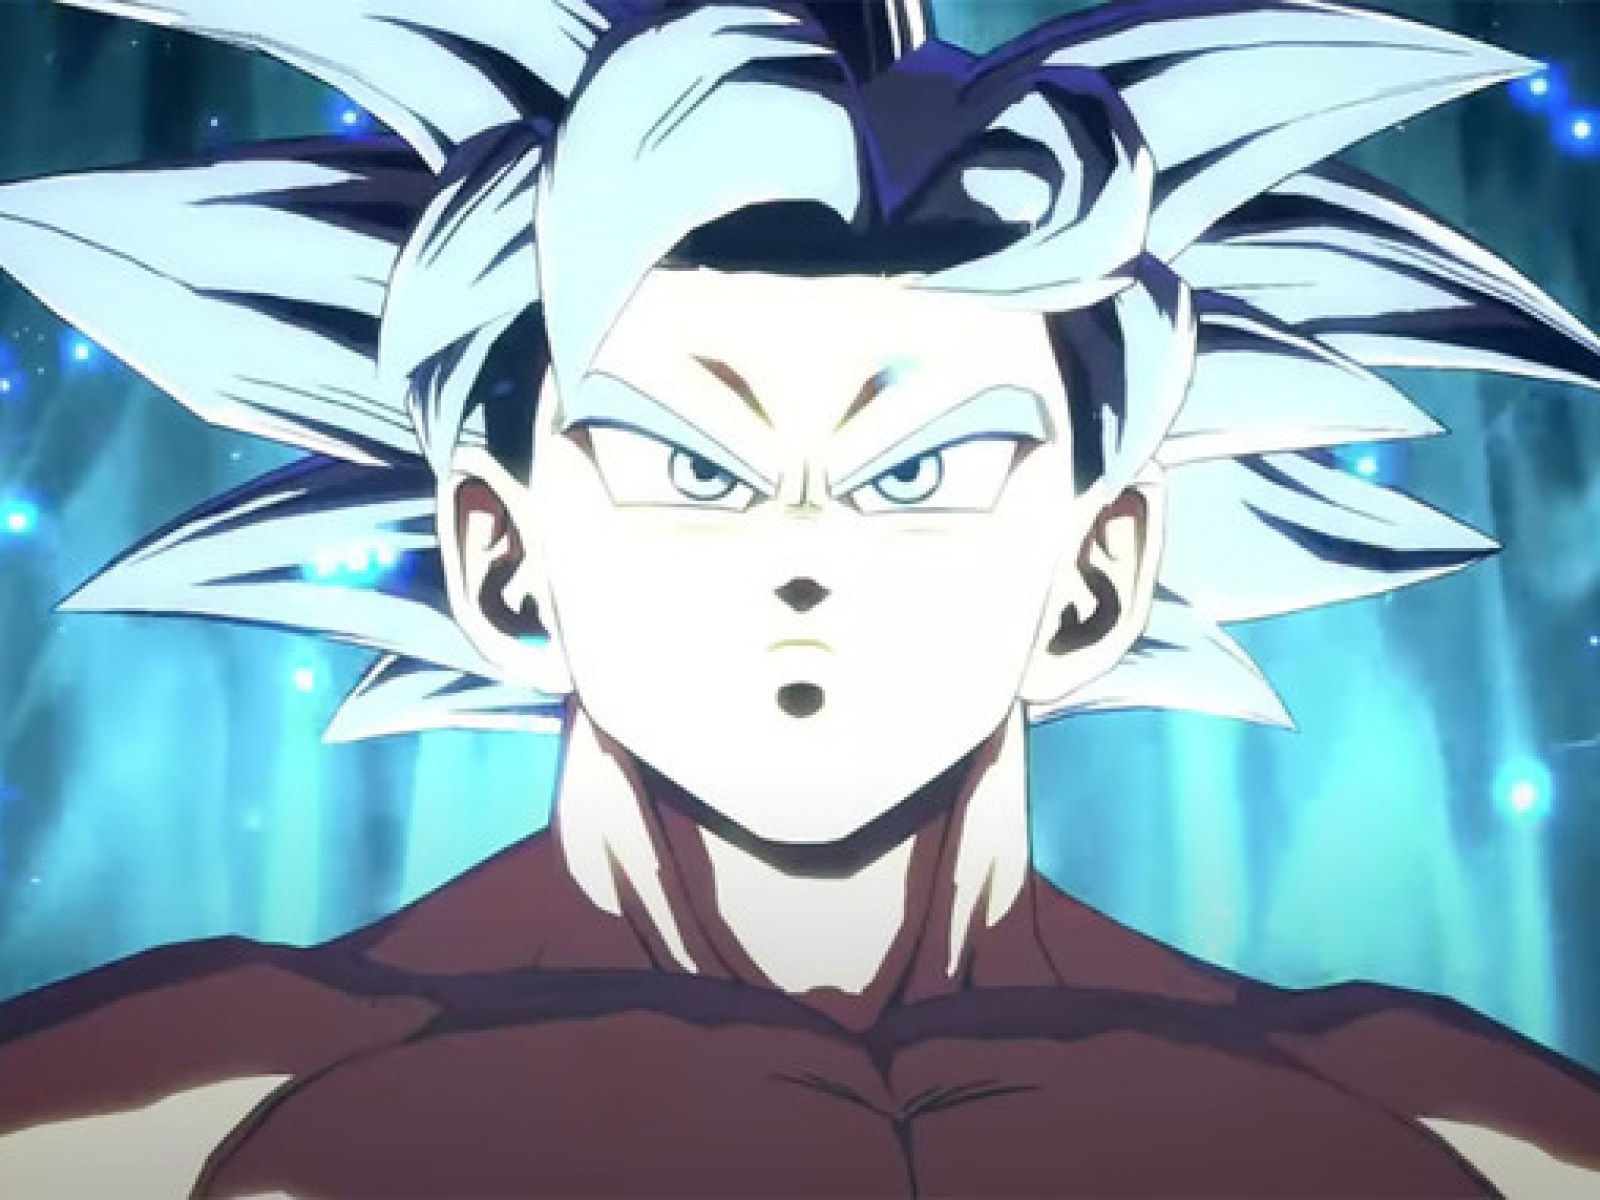 Goku May Already Possess the Key to Upgrade Ultra Instinct With a